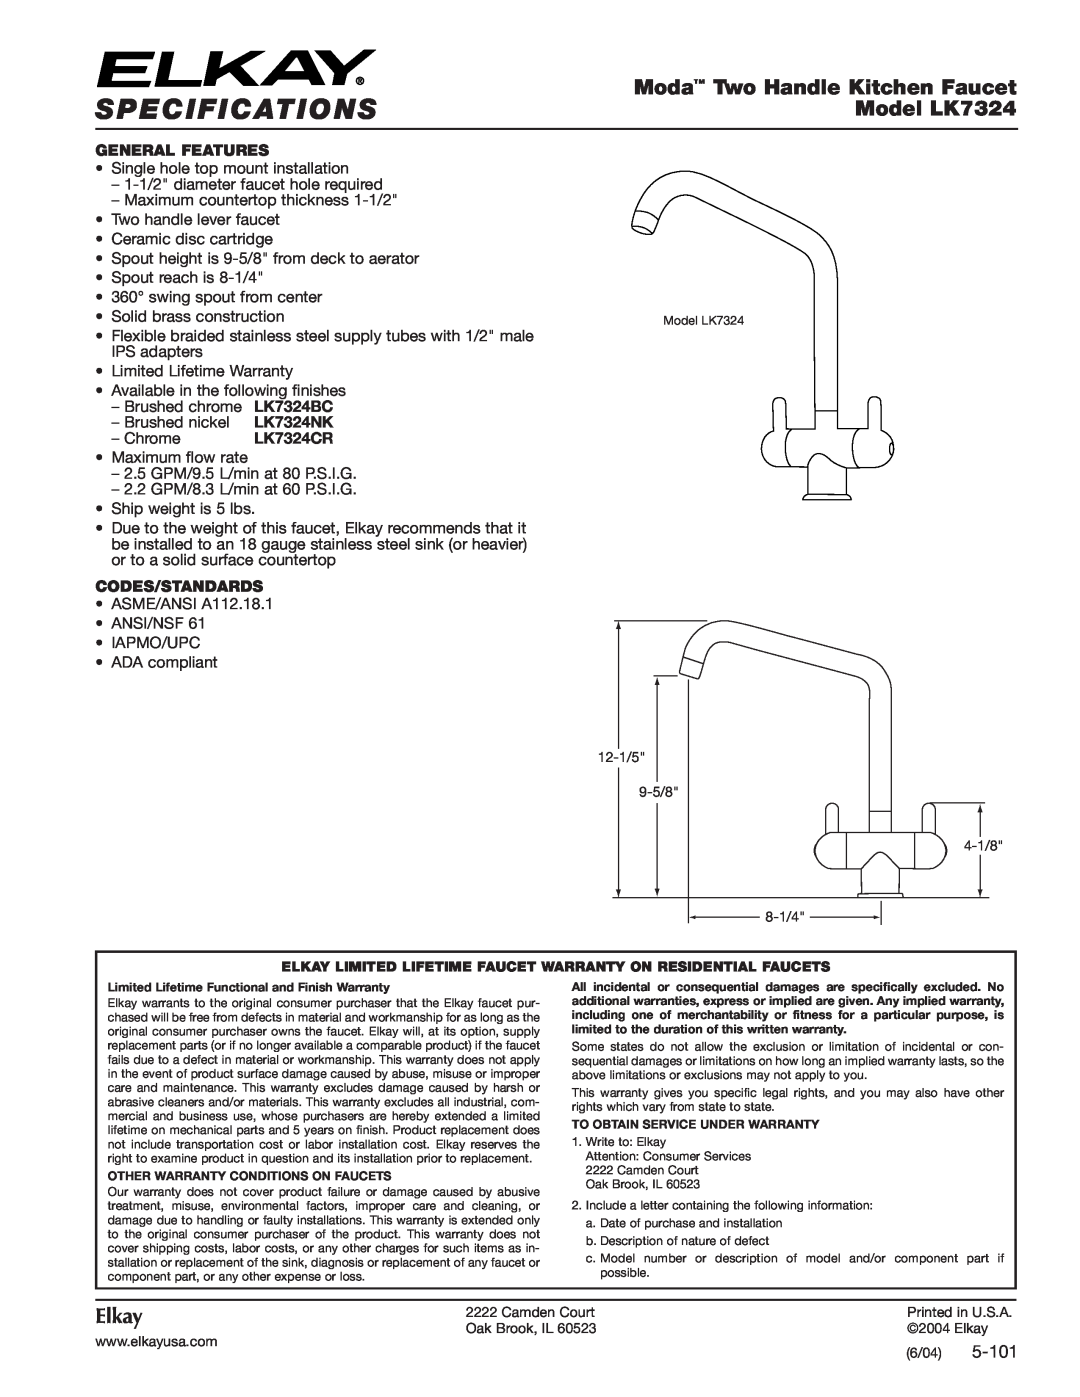 Elkay specifications Specifications, Moda Two Handle Kitchen Faucet, Model LK7324, Elkay, 5-101, General Features 